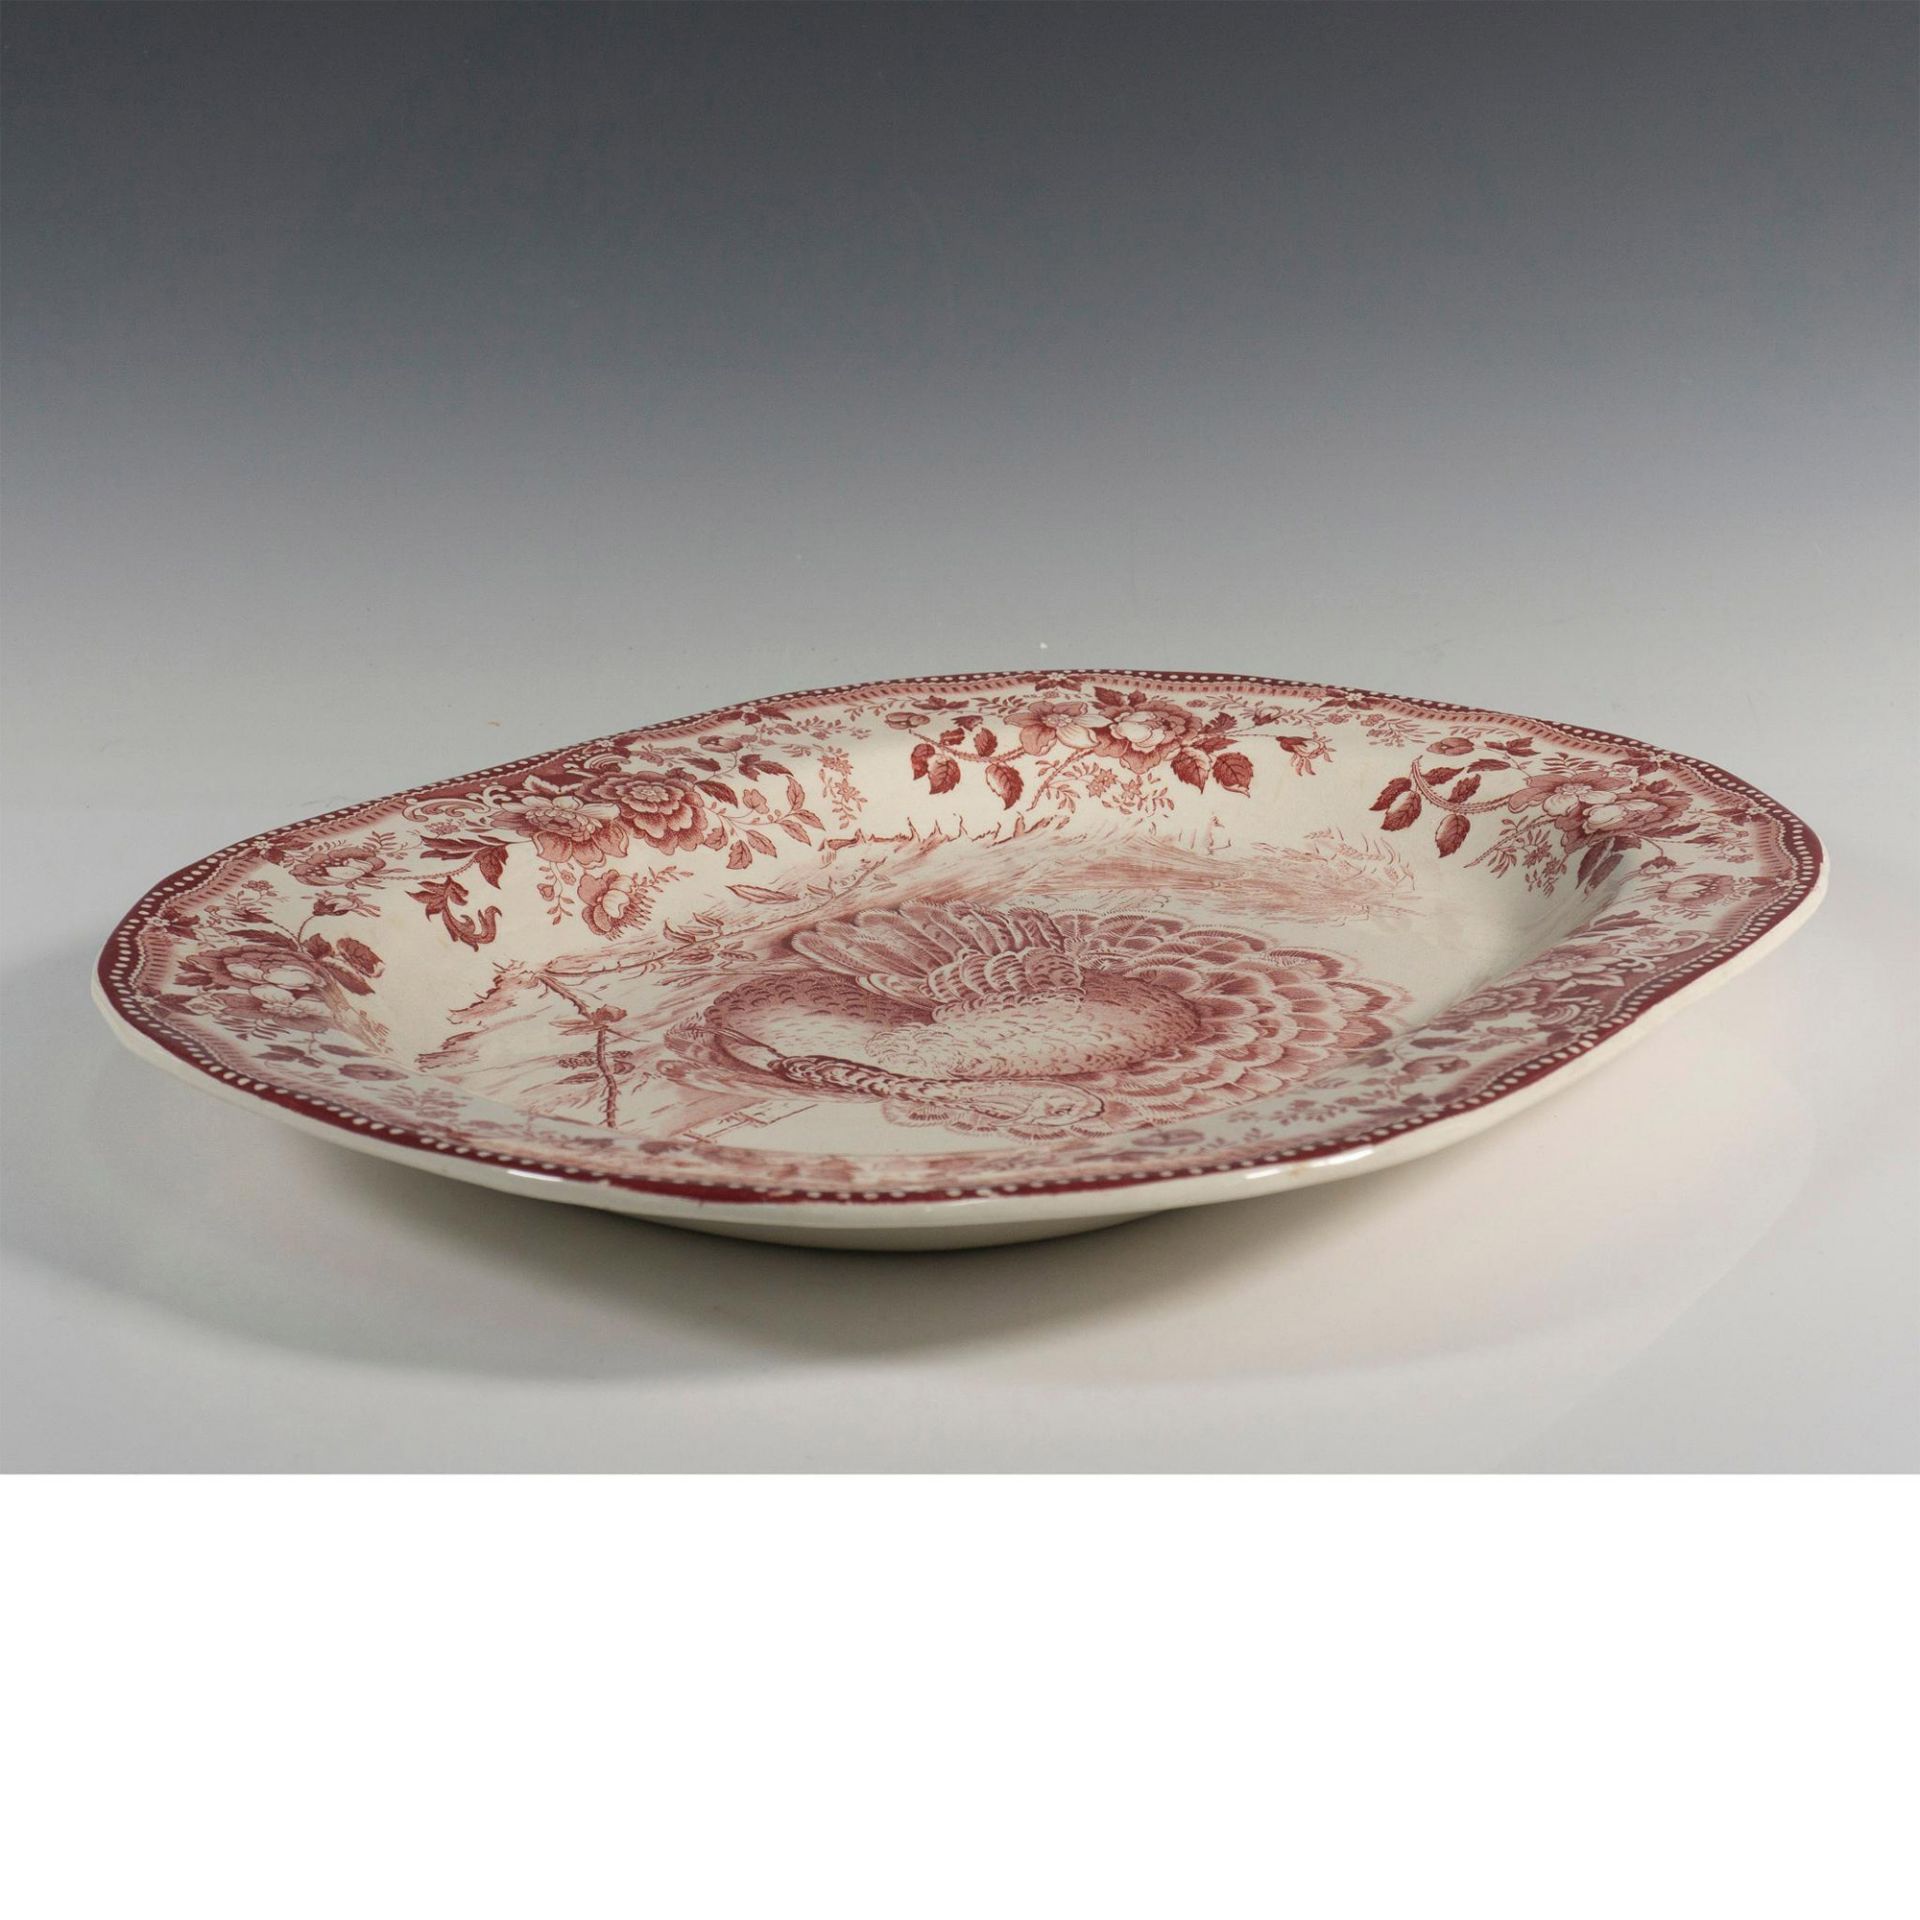 Royal Staffordshire Dinnerware, Red and White Turkey Platter - Image 3 of 3